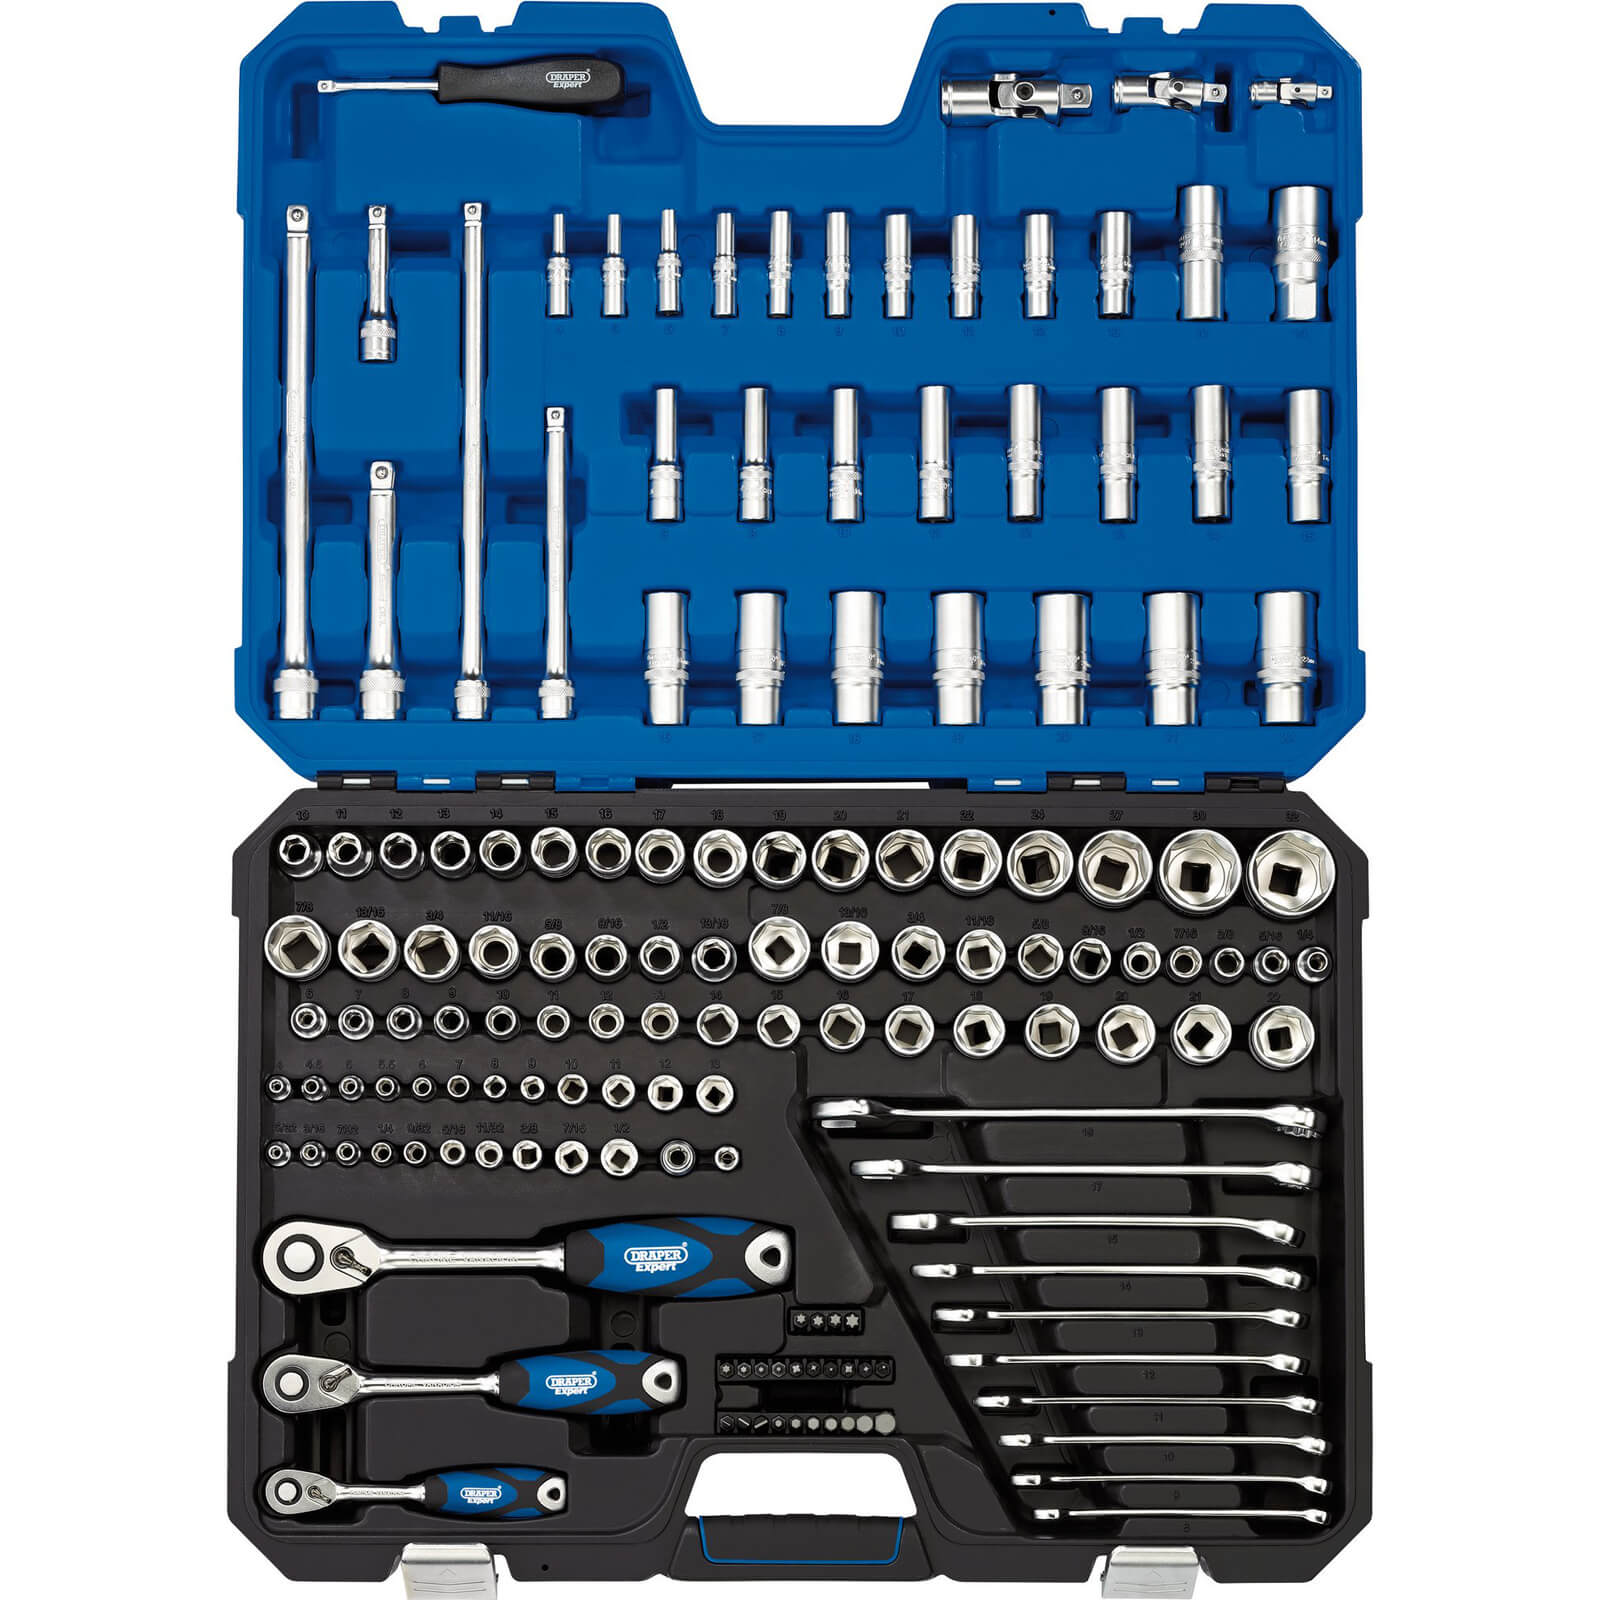 Image of Draper Expert 150 Piece Combination Drive Hex and Bi Hex Socket, Bit and Spanner Set Metric and Imperial Combination